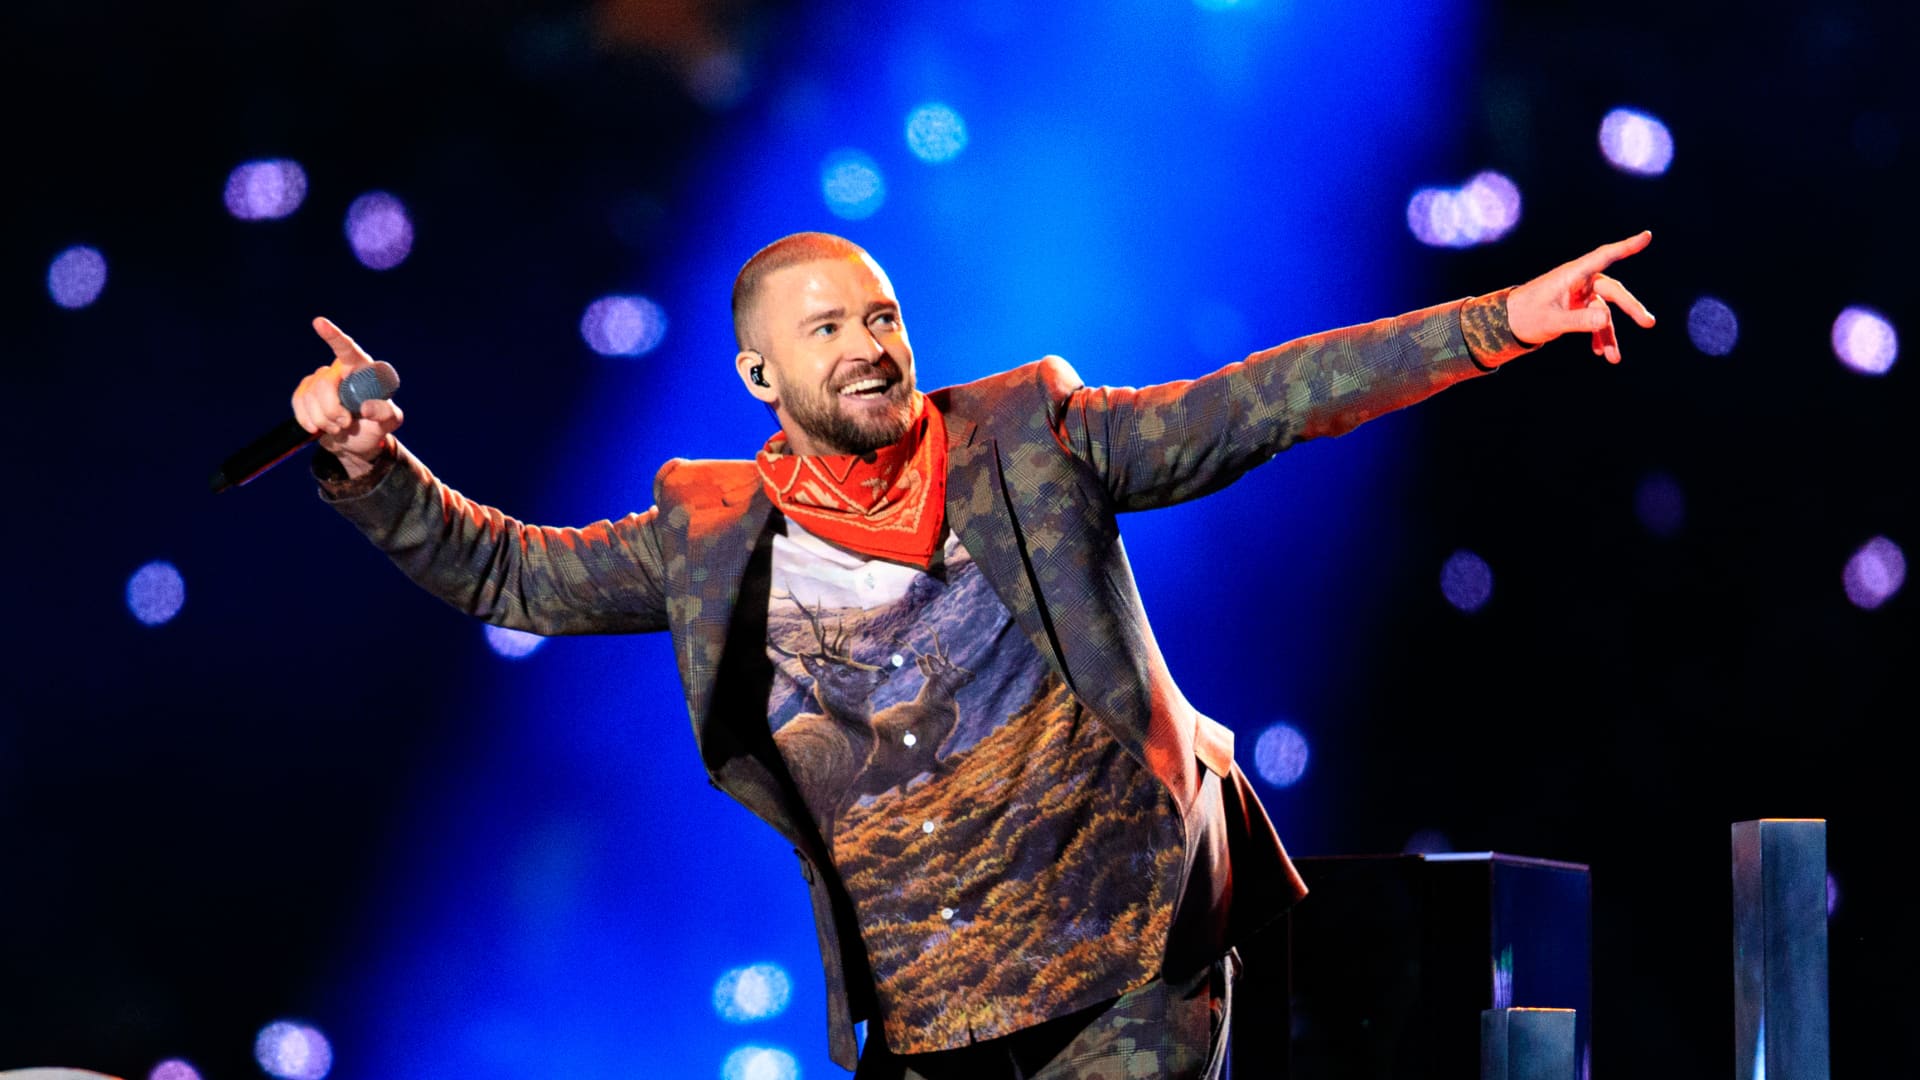 Justin Timberlake sells song catalog for $100M to fund backed by Blackstone